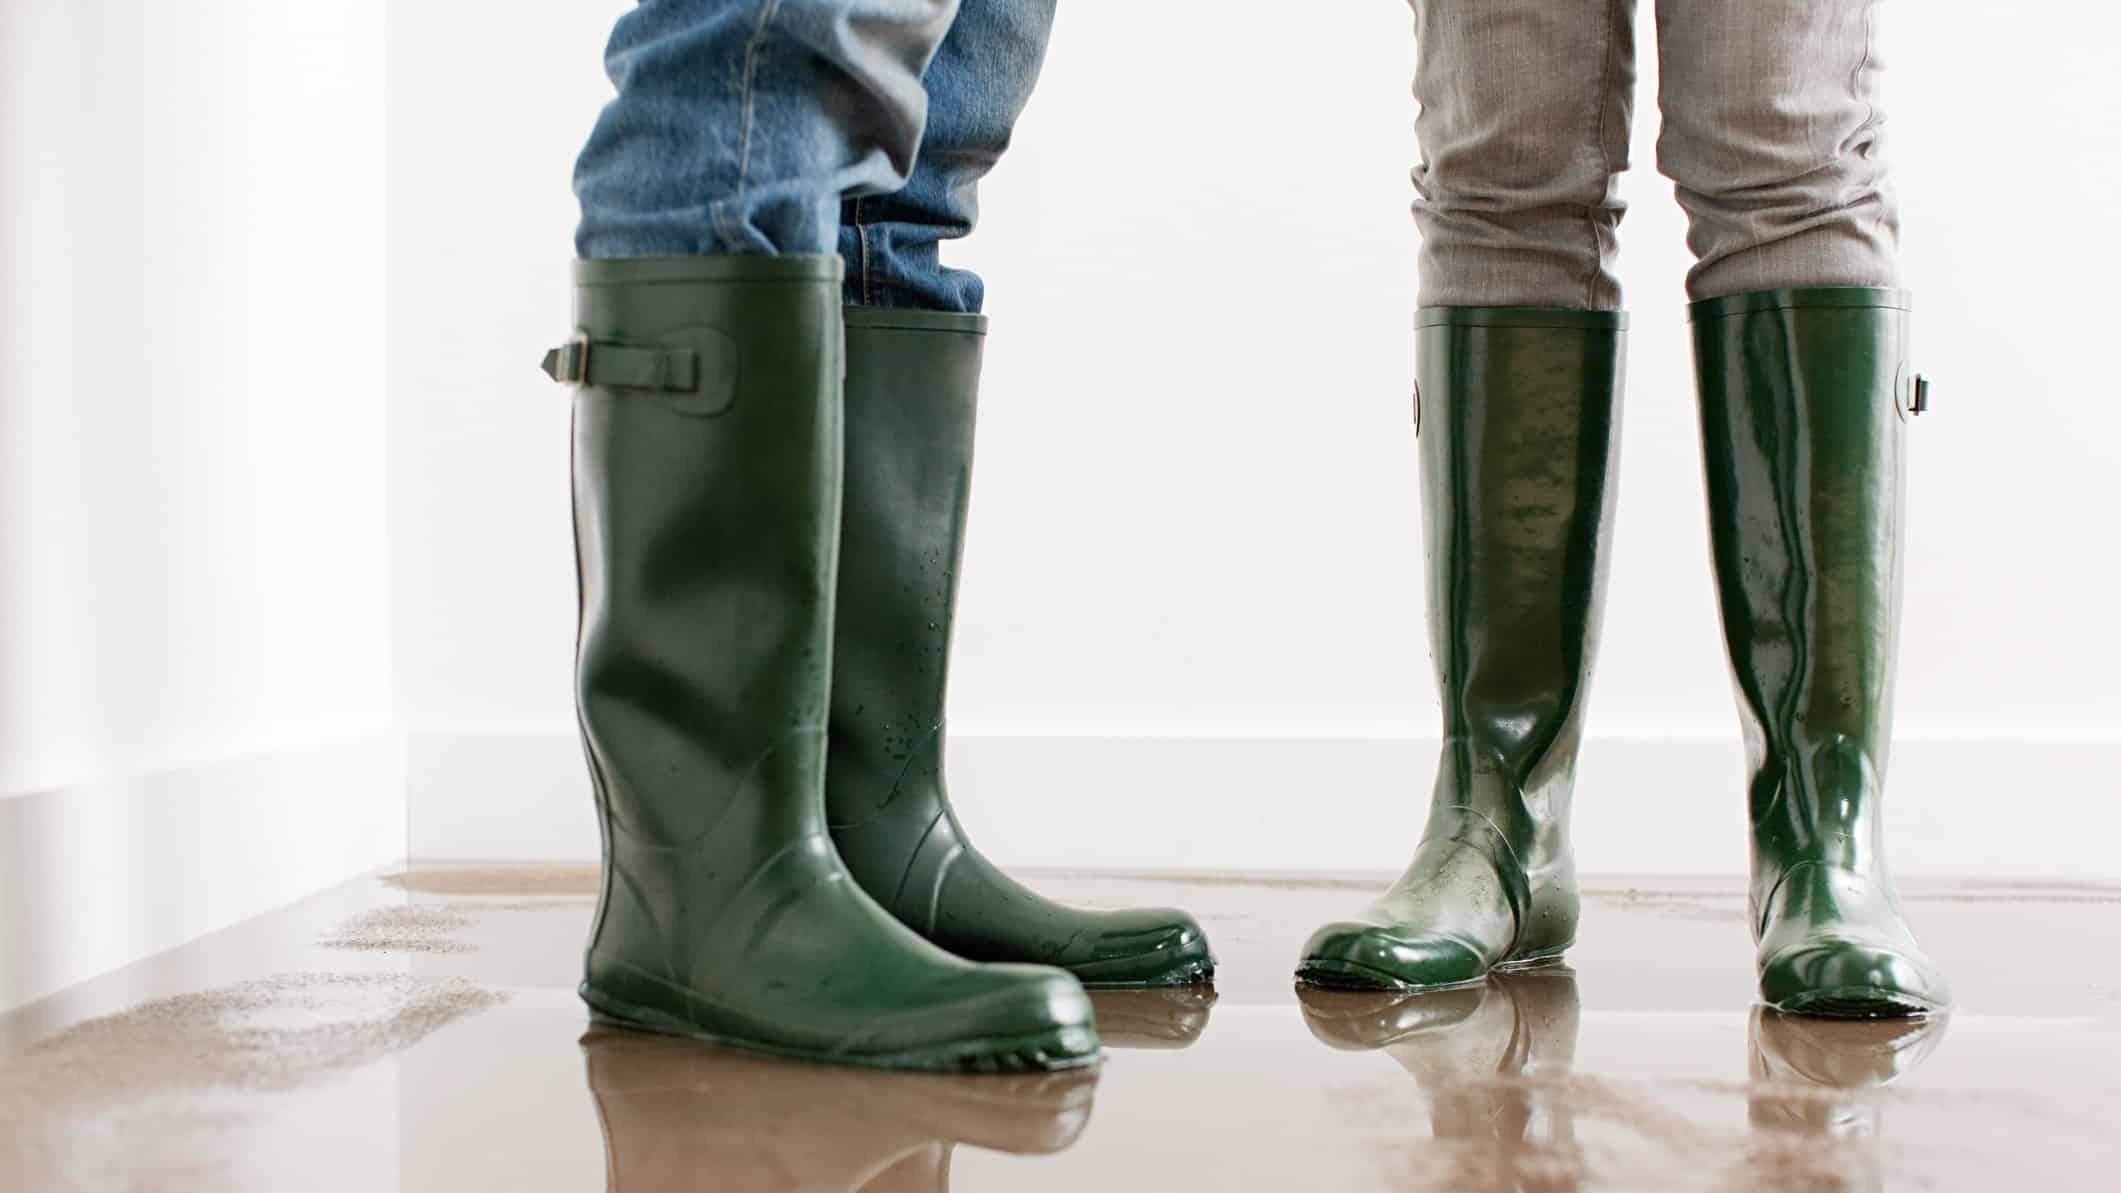 Legs and feet of two people wearing green gumboots standing in a flooded room ready to clean up.